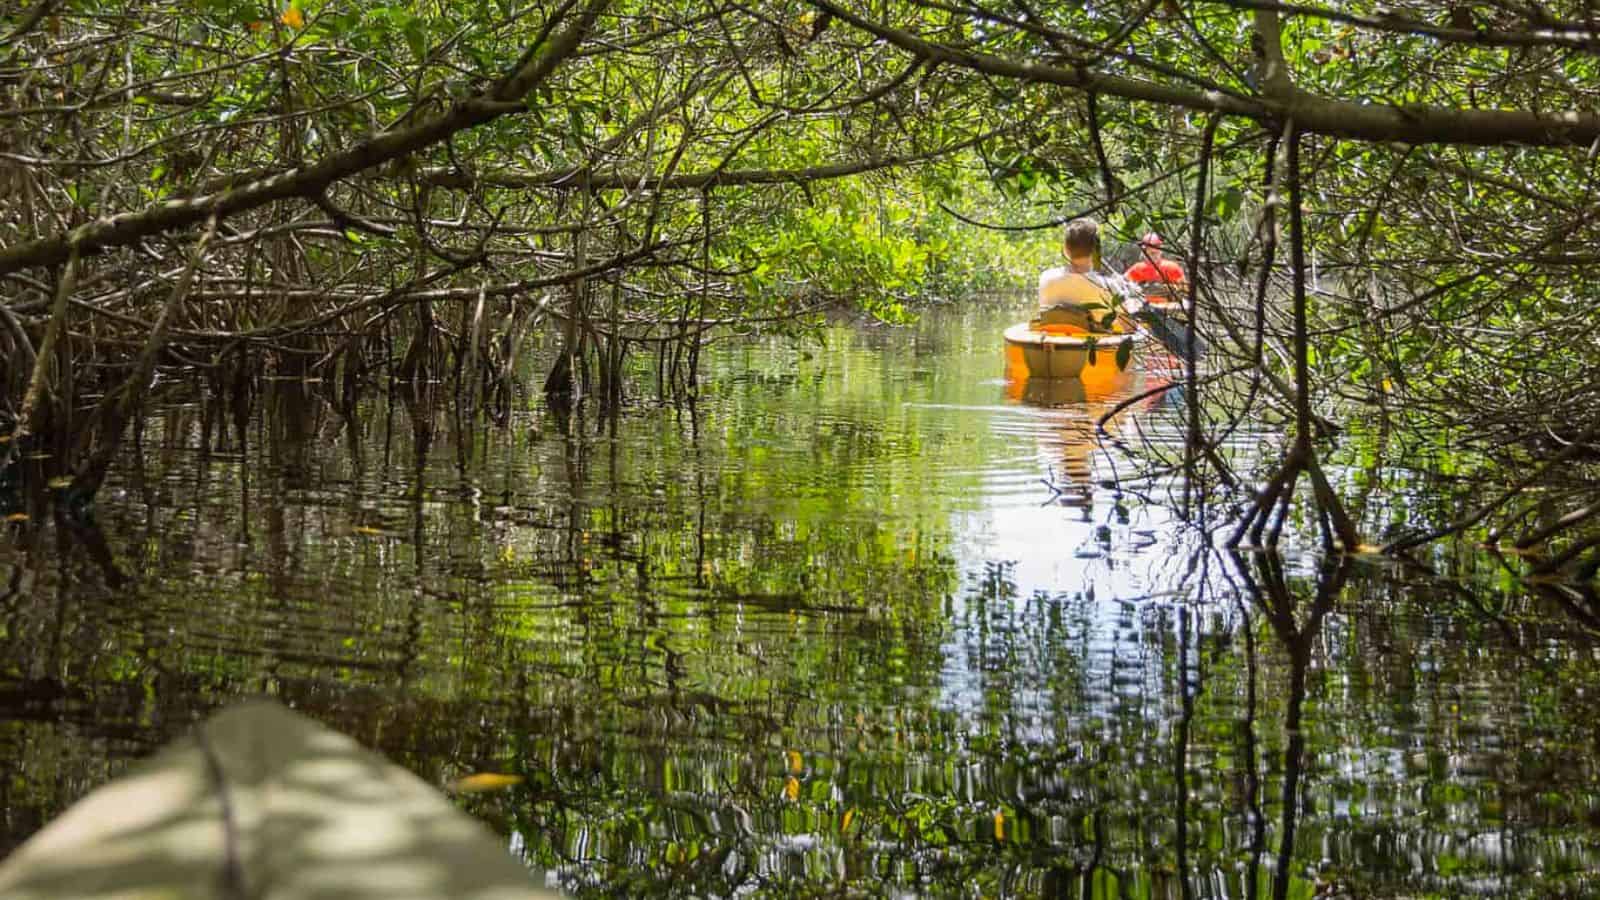 <p>We highly recommend kayaking in the Everglades National Park for a truly unique outdoor adventure. With over 1.5 million acres of wetlands, this park is home to a diverse abundance of wildlife, including alligators, manatees, and a variety of bird species.</p> <p>Paddling through the park’s mangrove tunnels is an unforgettable experience and a great way to get up close and personal with nature. If you’re an outdoor enthusiast, you’ll love exploring the park’s many water trails and fishing opportunities.</p> <p>Just remember to respect the park’s fragile ecosystem and follow all safety guidelines when kayaking in alligator territory.</p>